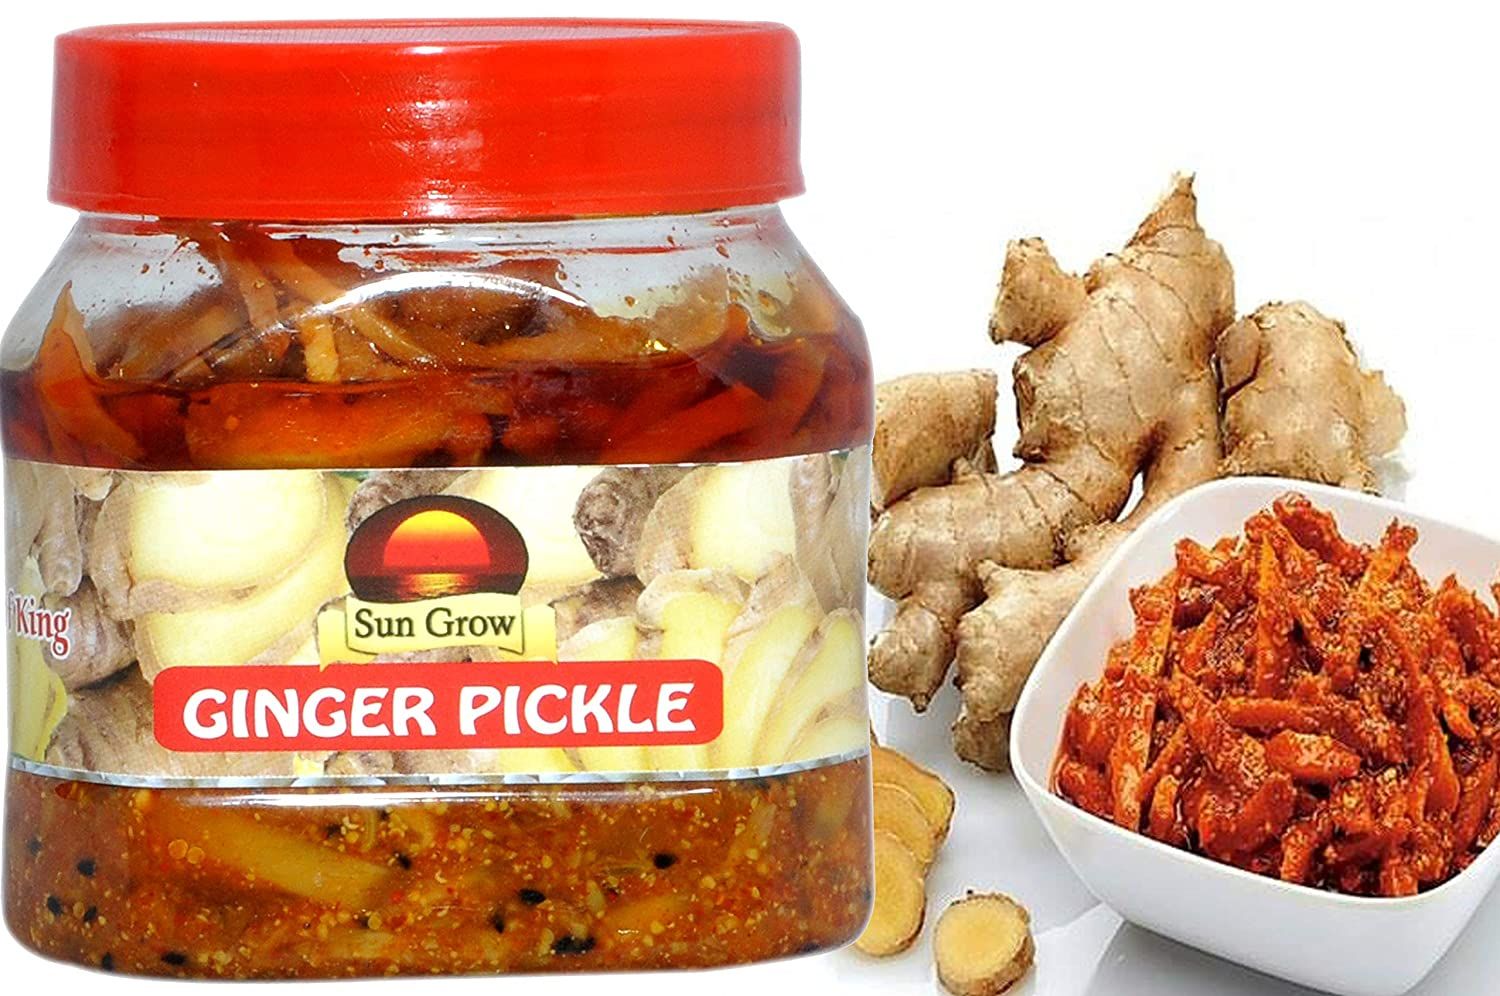 Sun Grow Ginger Pickle Image